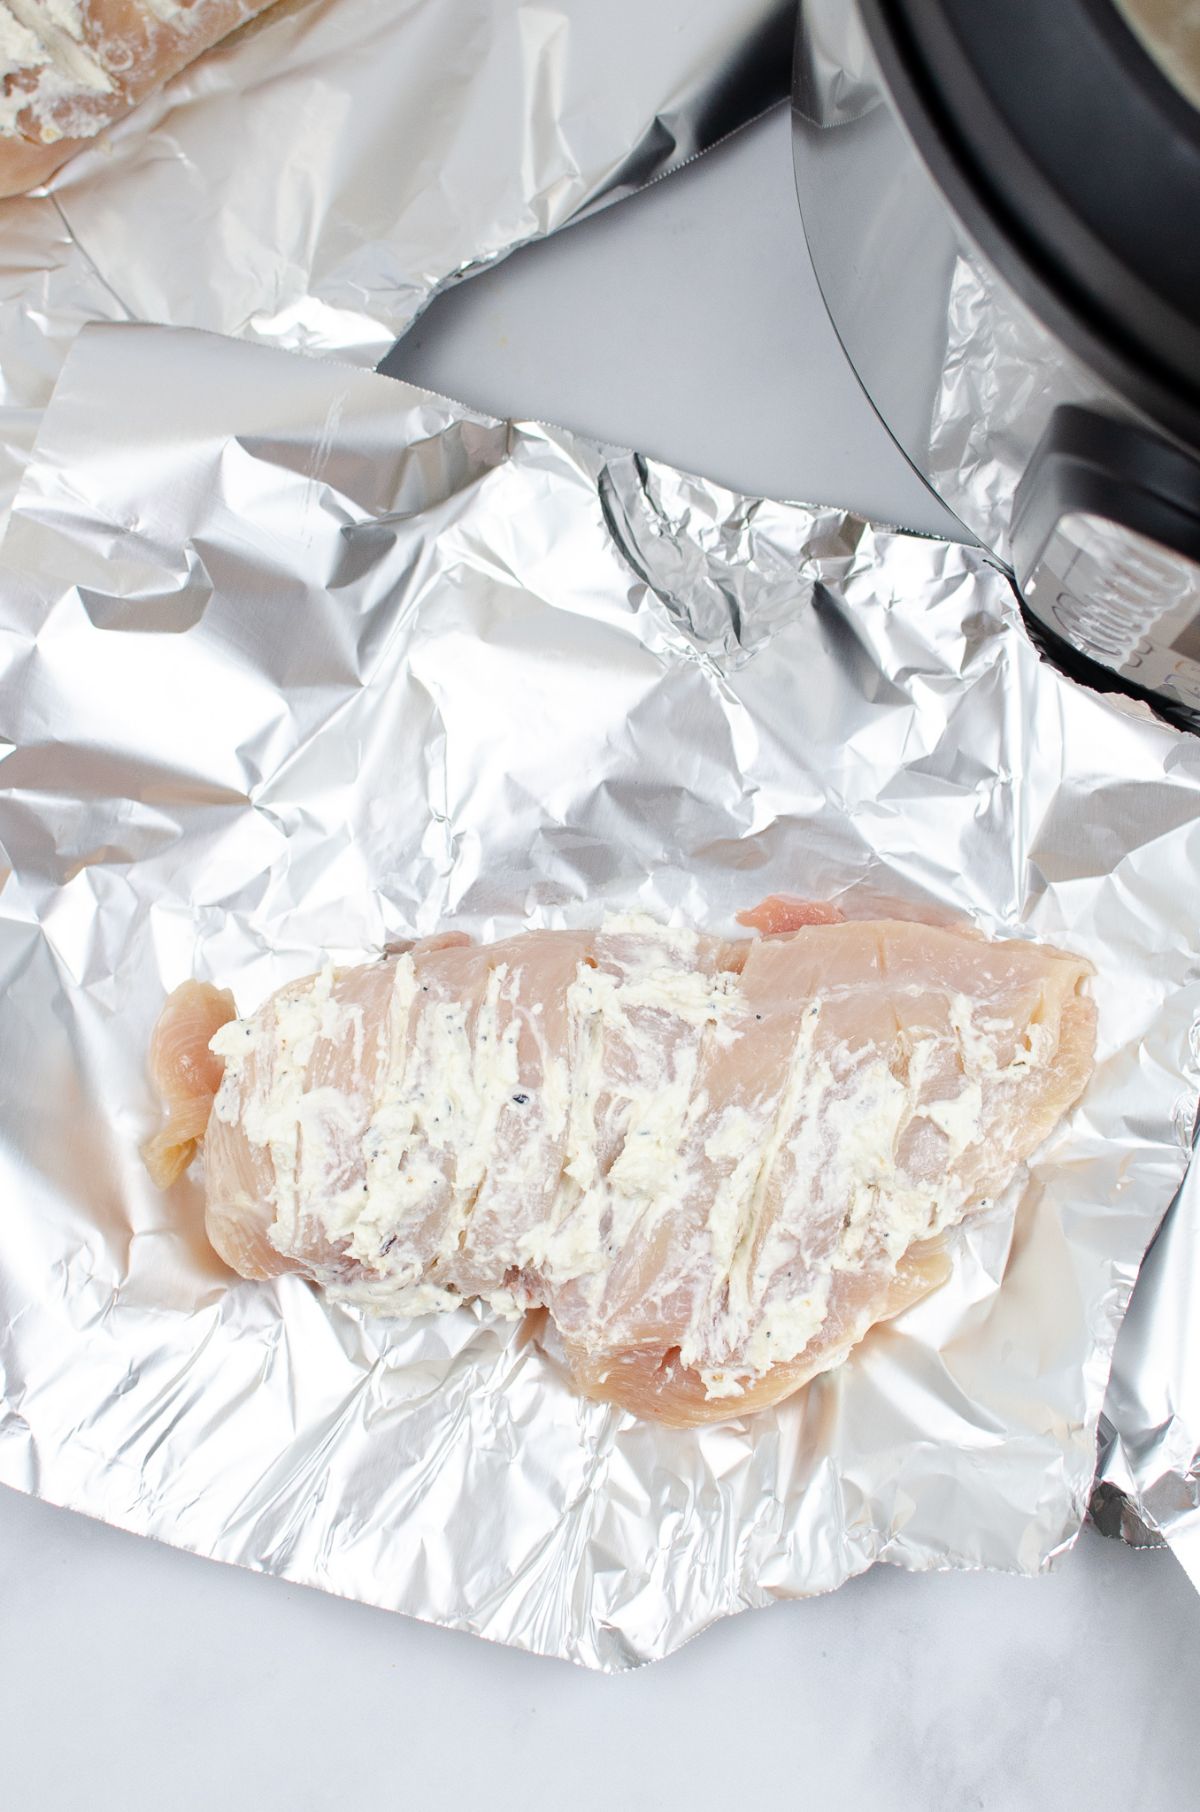 A piece of chicken breast on a foil topped with cream cheese.